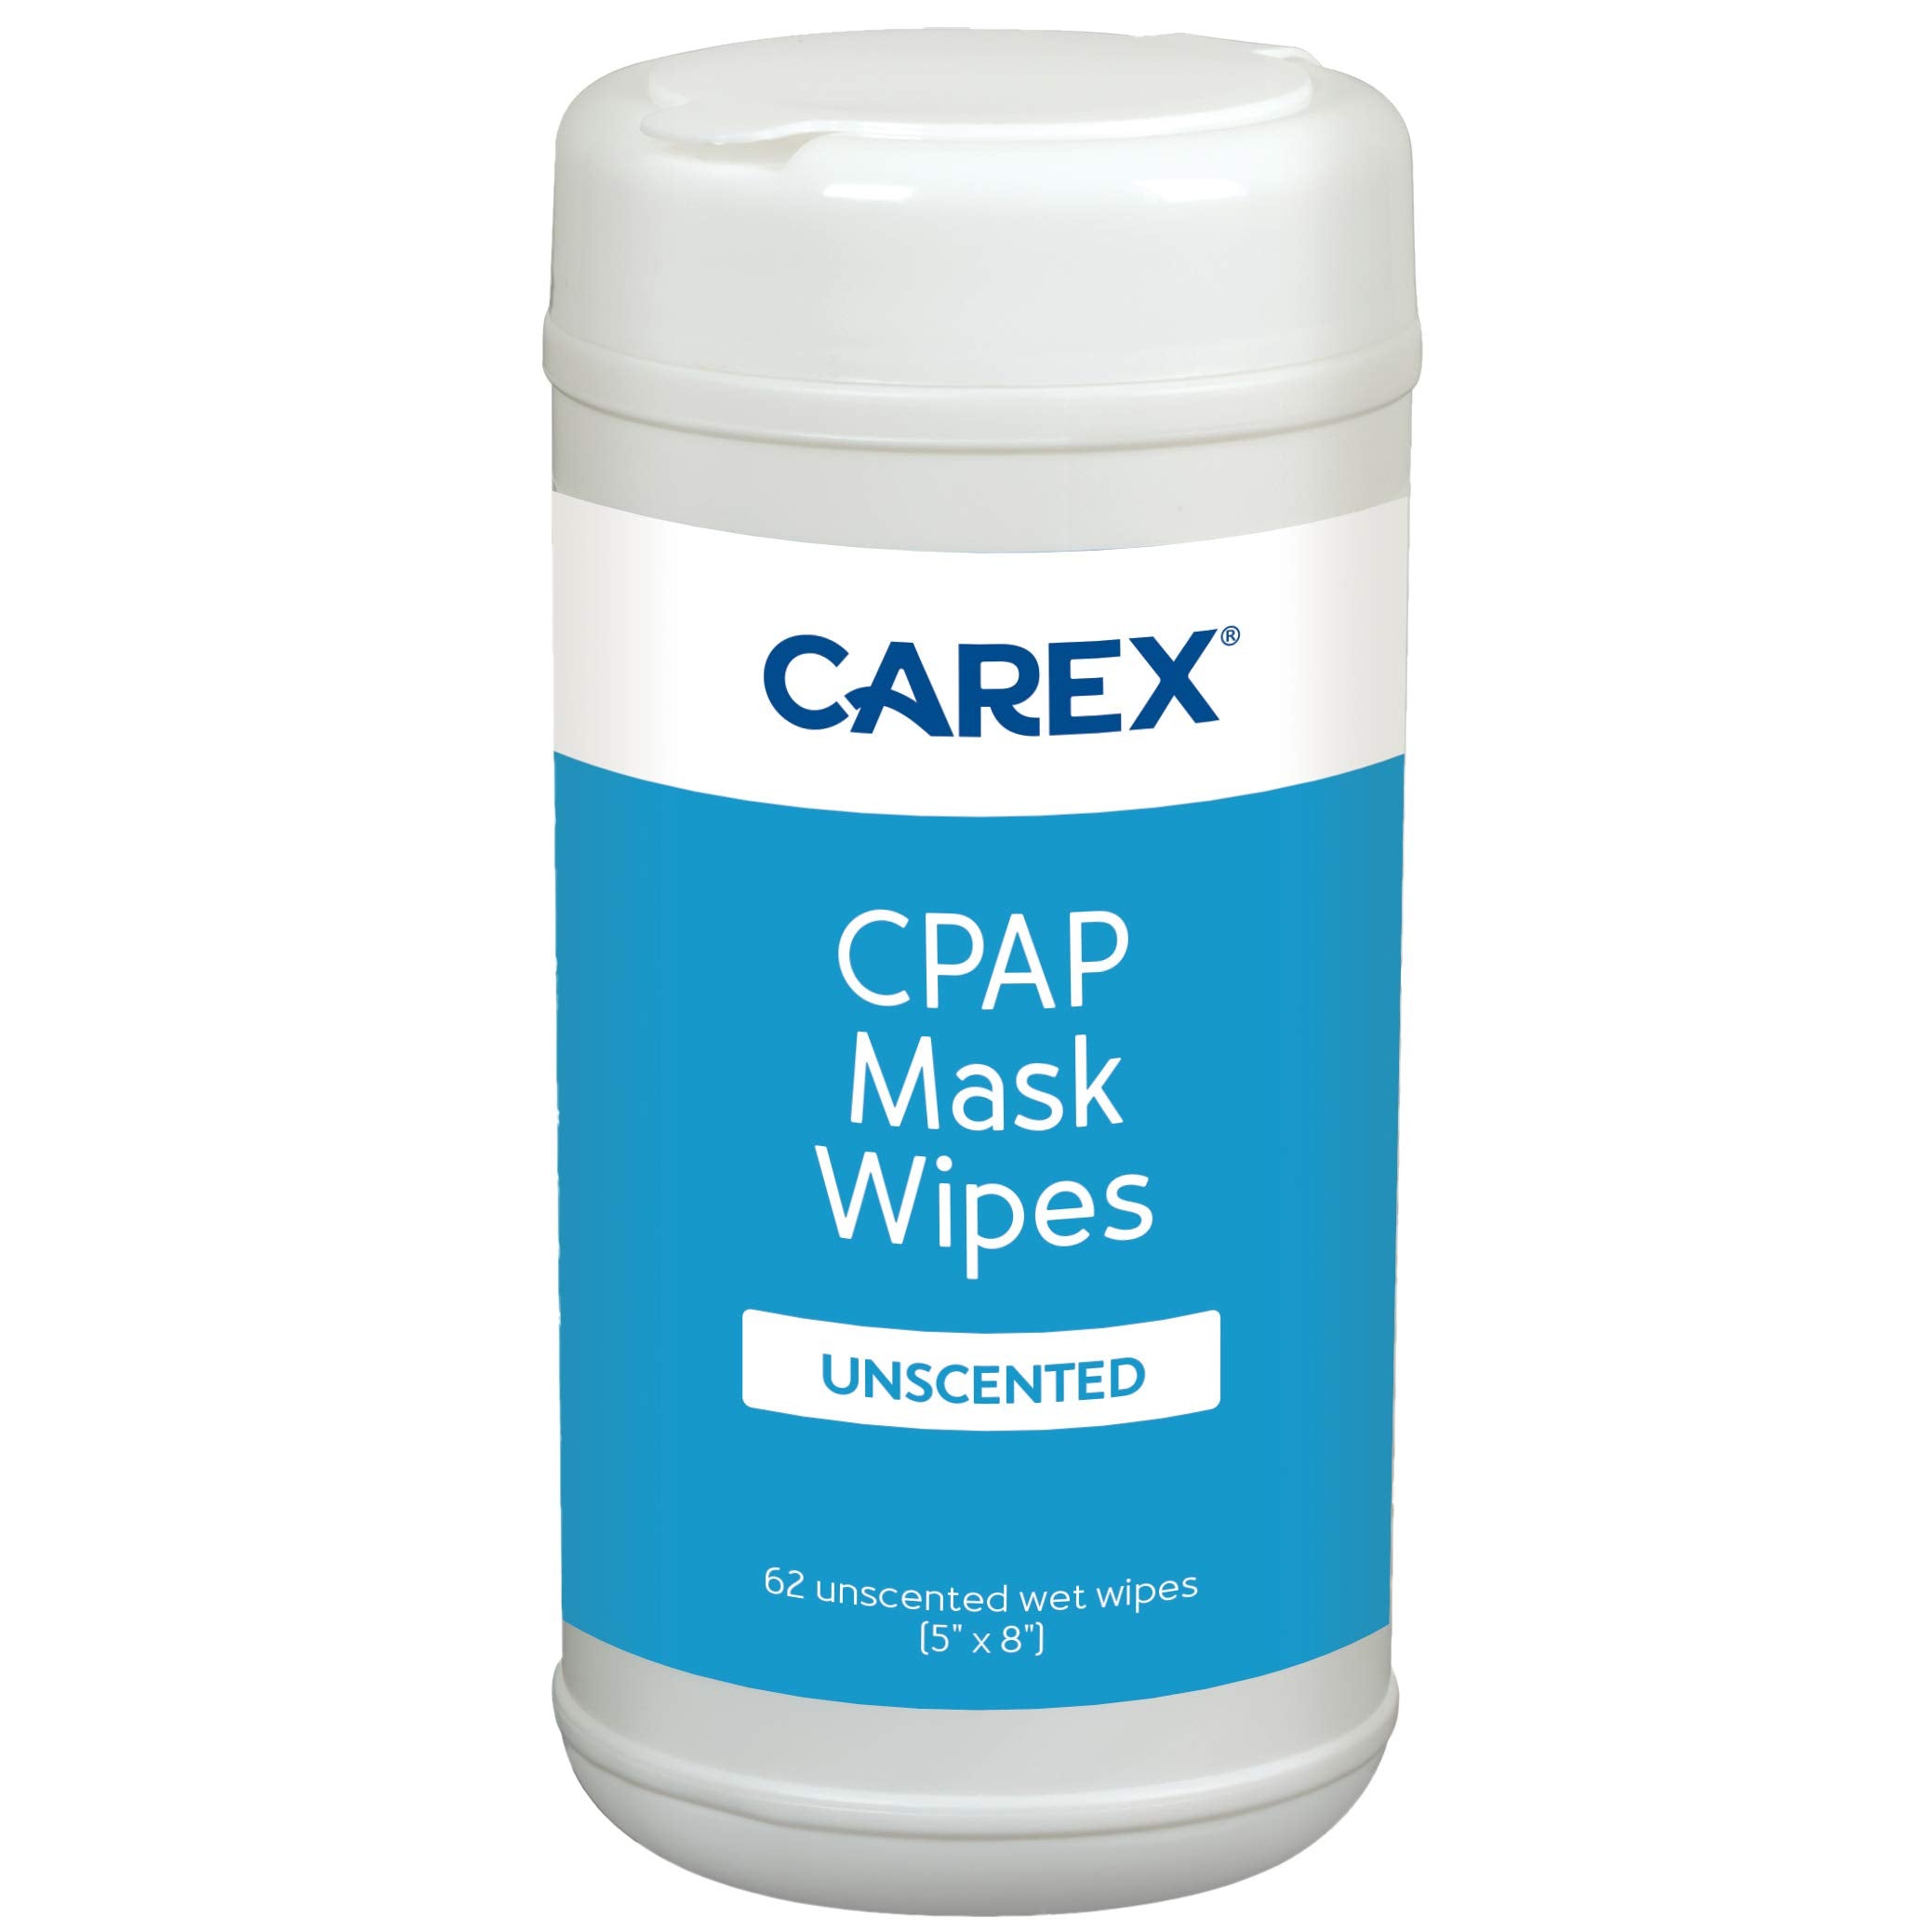 Carex CPAP Mask Wipes - 62 Count of Unscented CPAP Wipes for CPAP Masks